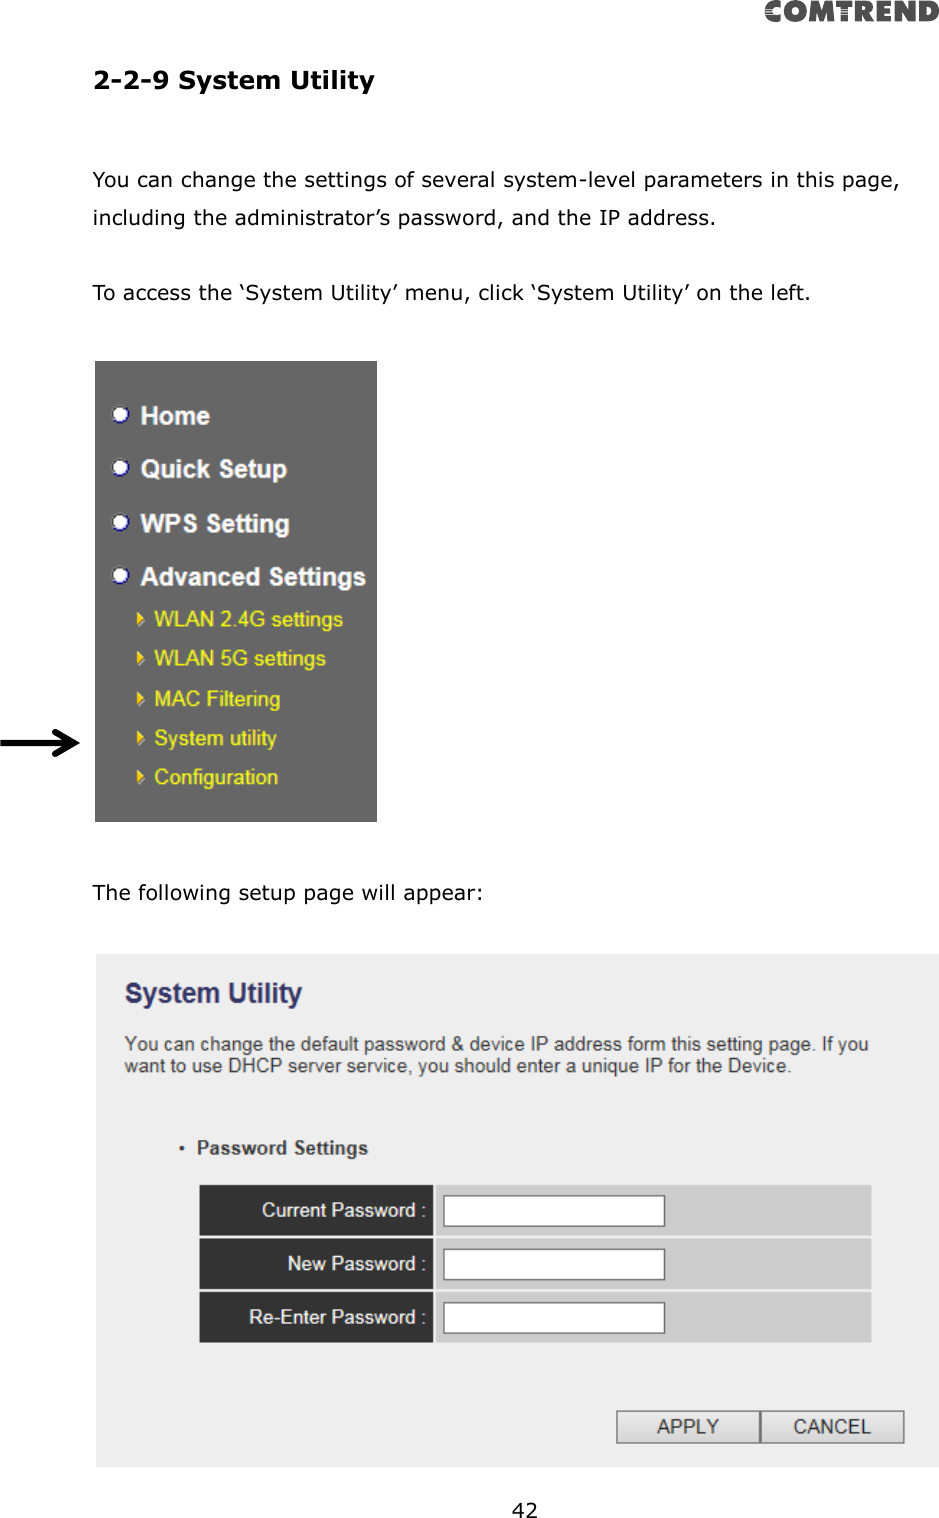       42  2-2-9 System Utility  You can change the settings of several system-level parameters in this page, including the administrator’s password, and the IP address.  To access the ‘System Utility’ menu, click ‘System Utility’ on the left.    The following setup page will appear:   